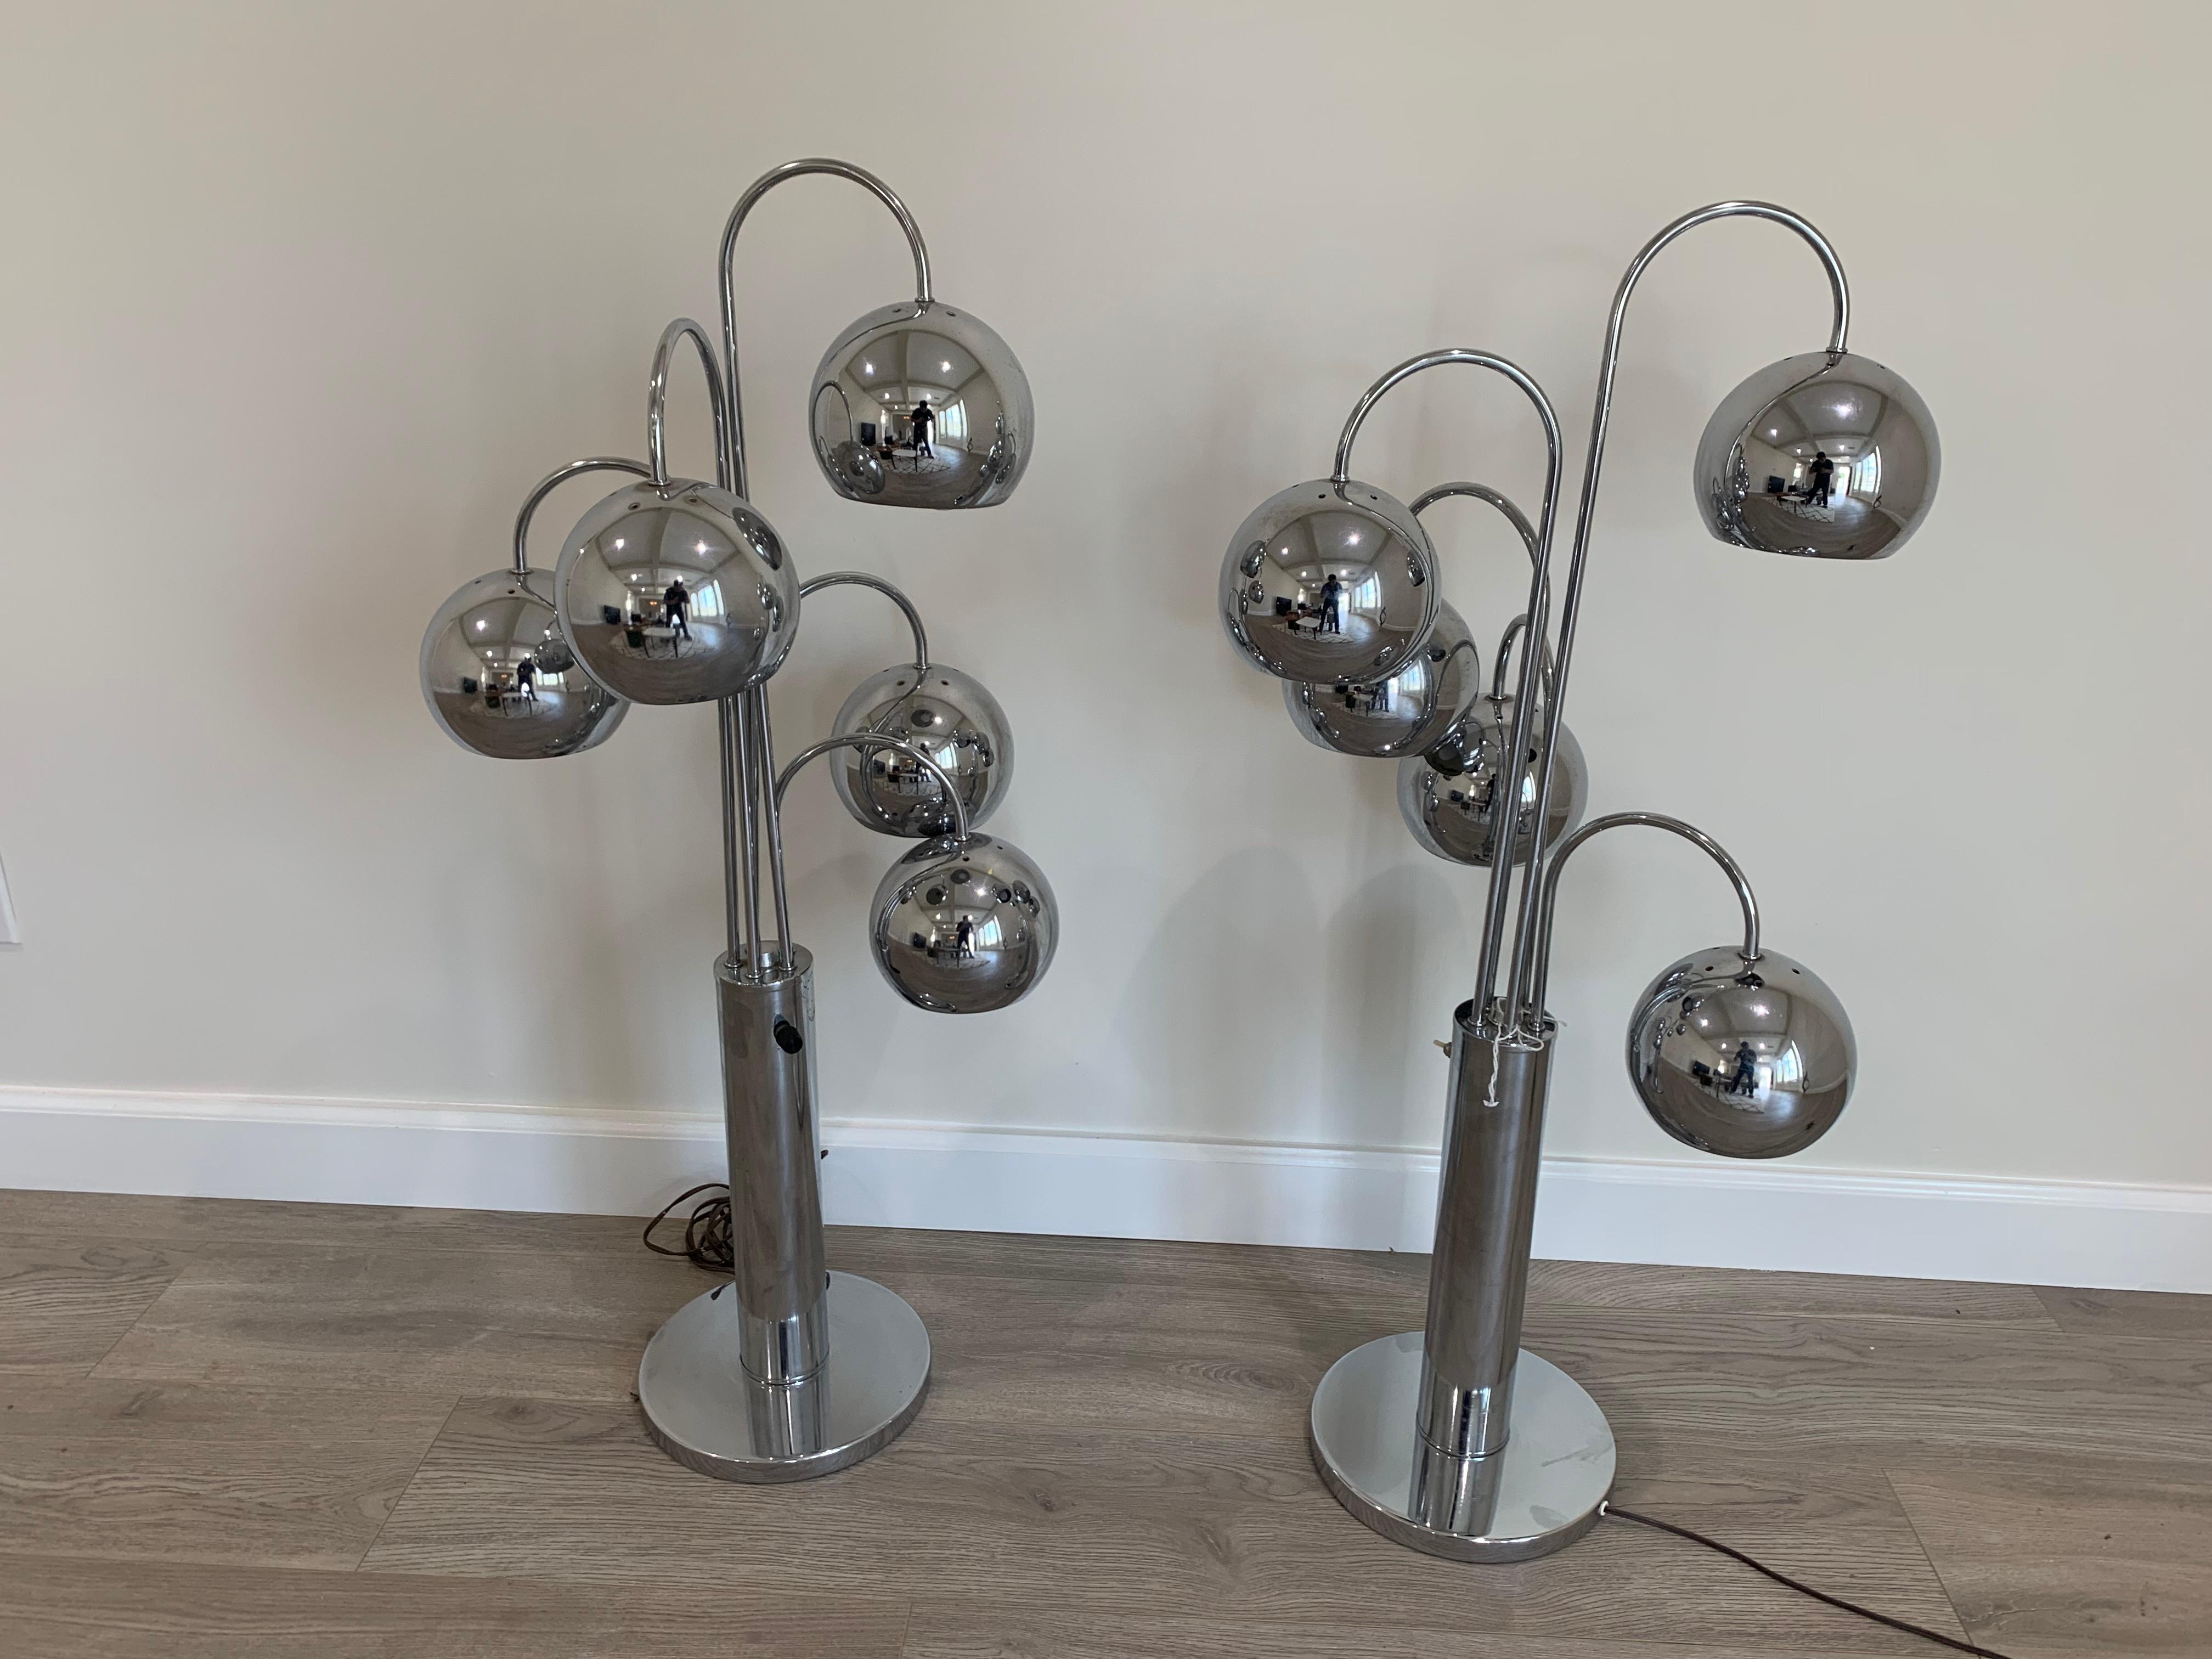 Chromed pair table lamps by Robert Sonneman with 5 adjustable eyeball arms and dimmable switches, circa 1960s.